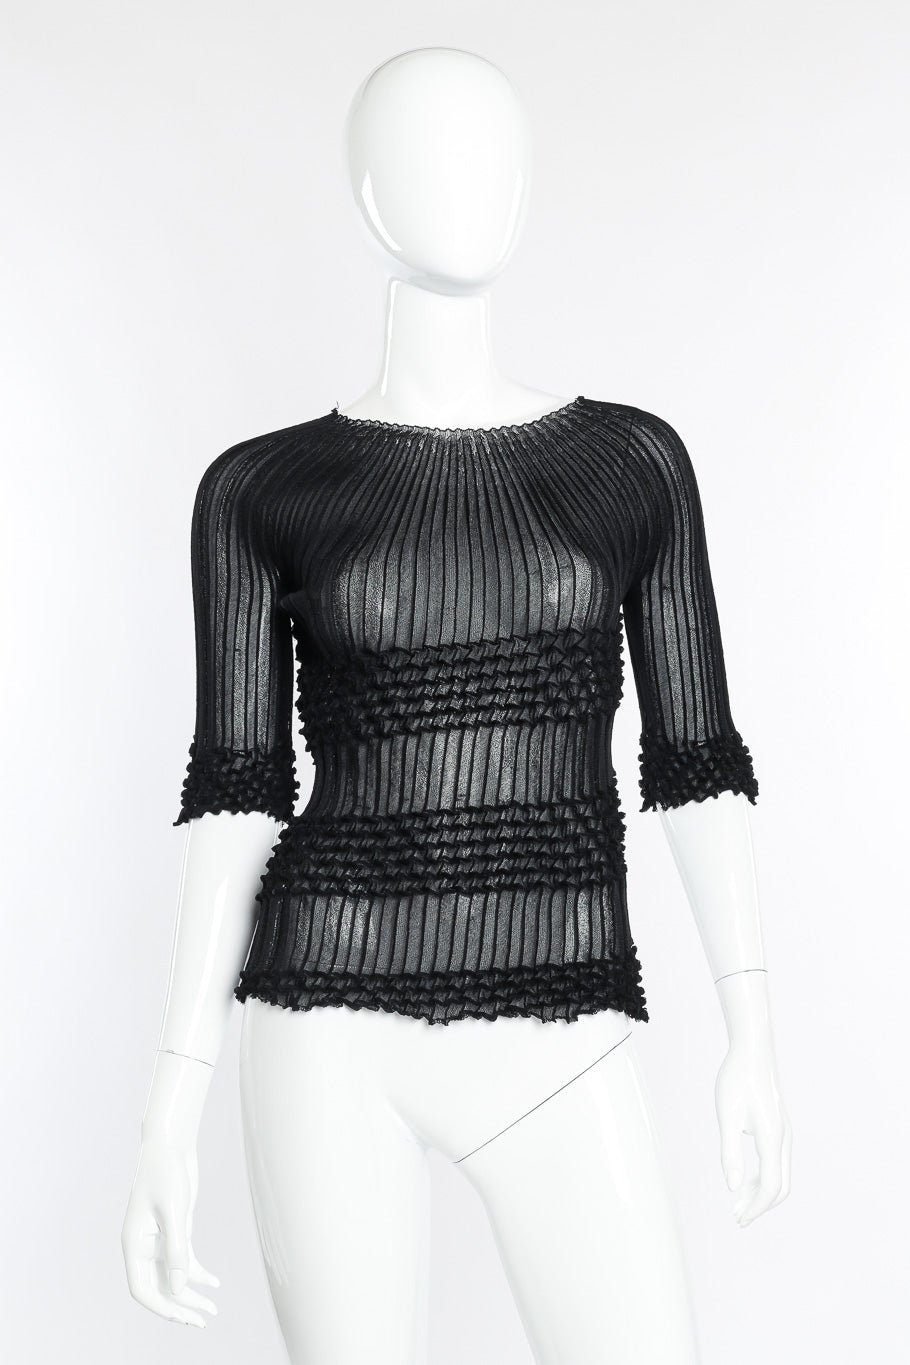 Pleats Please Issey Miyake Spike Pleat Top front view on mannequin @Recessla